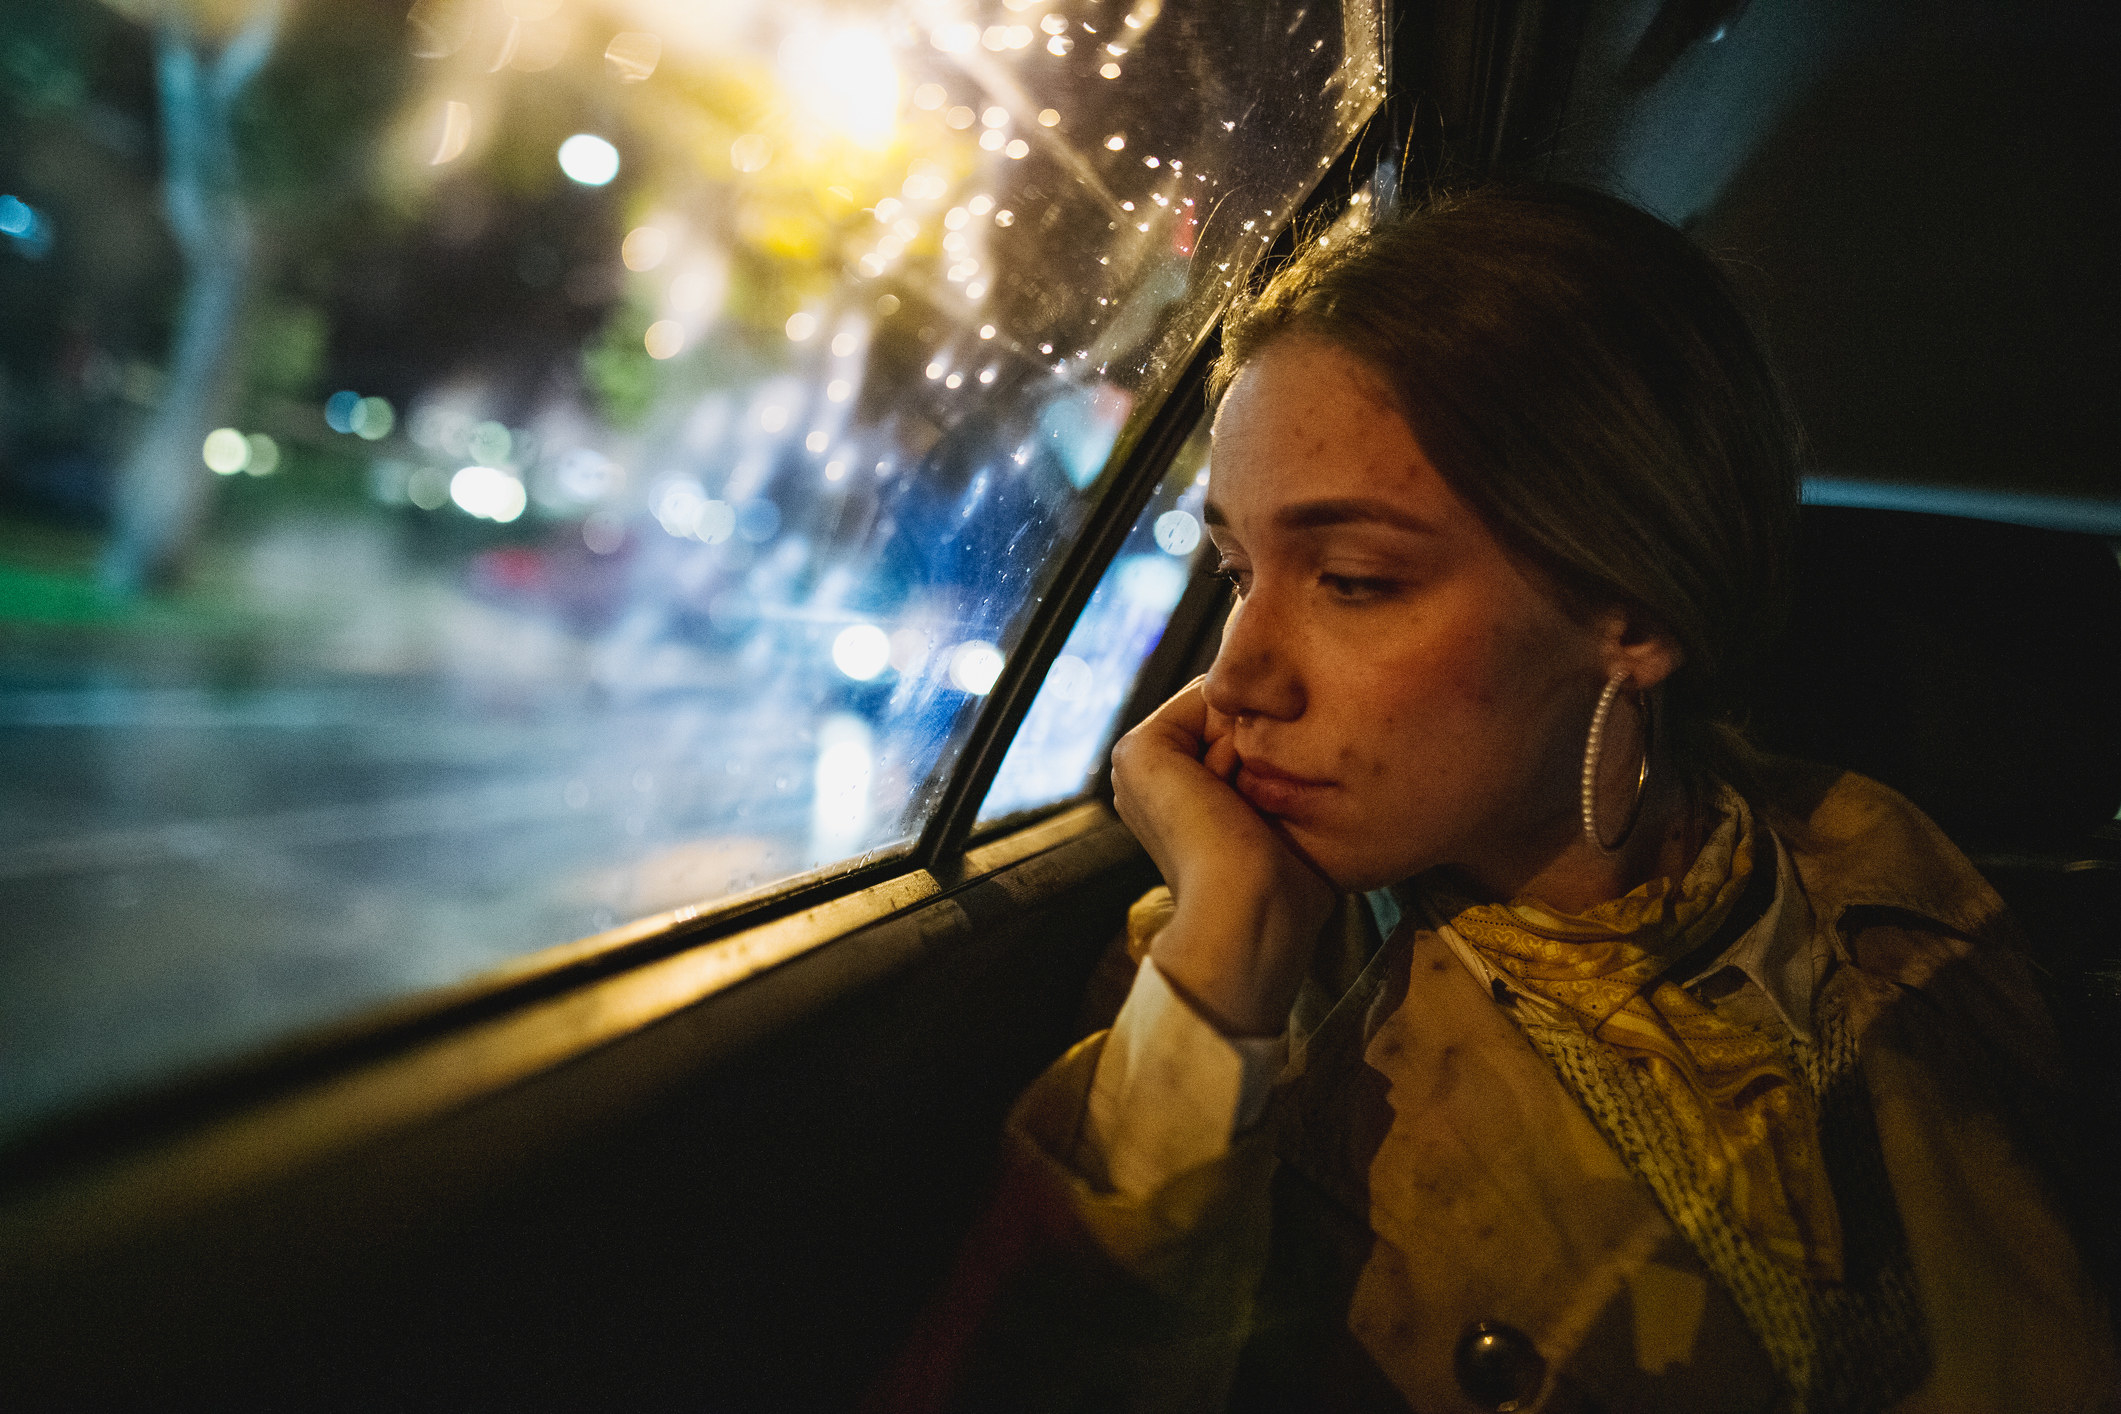 Sad woman lost in thought in back of cab